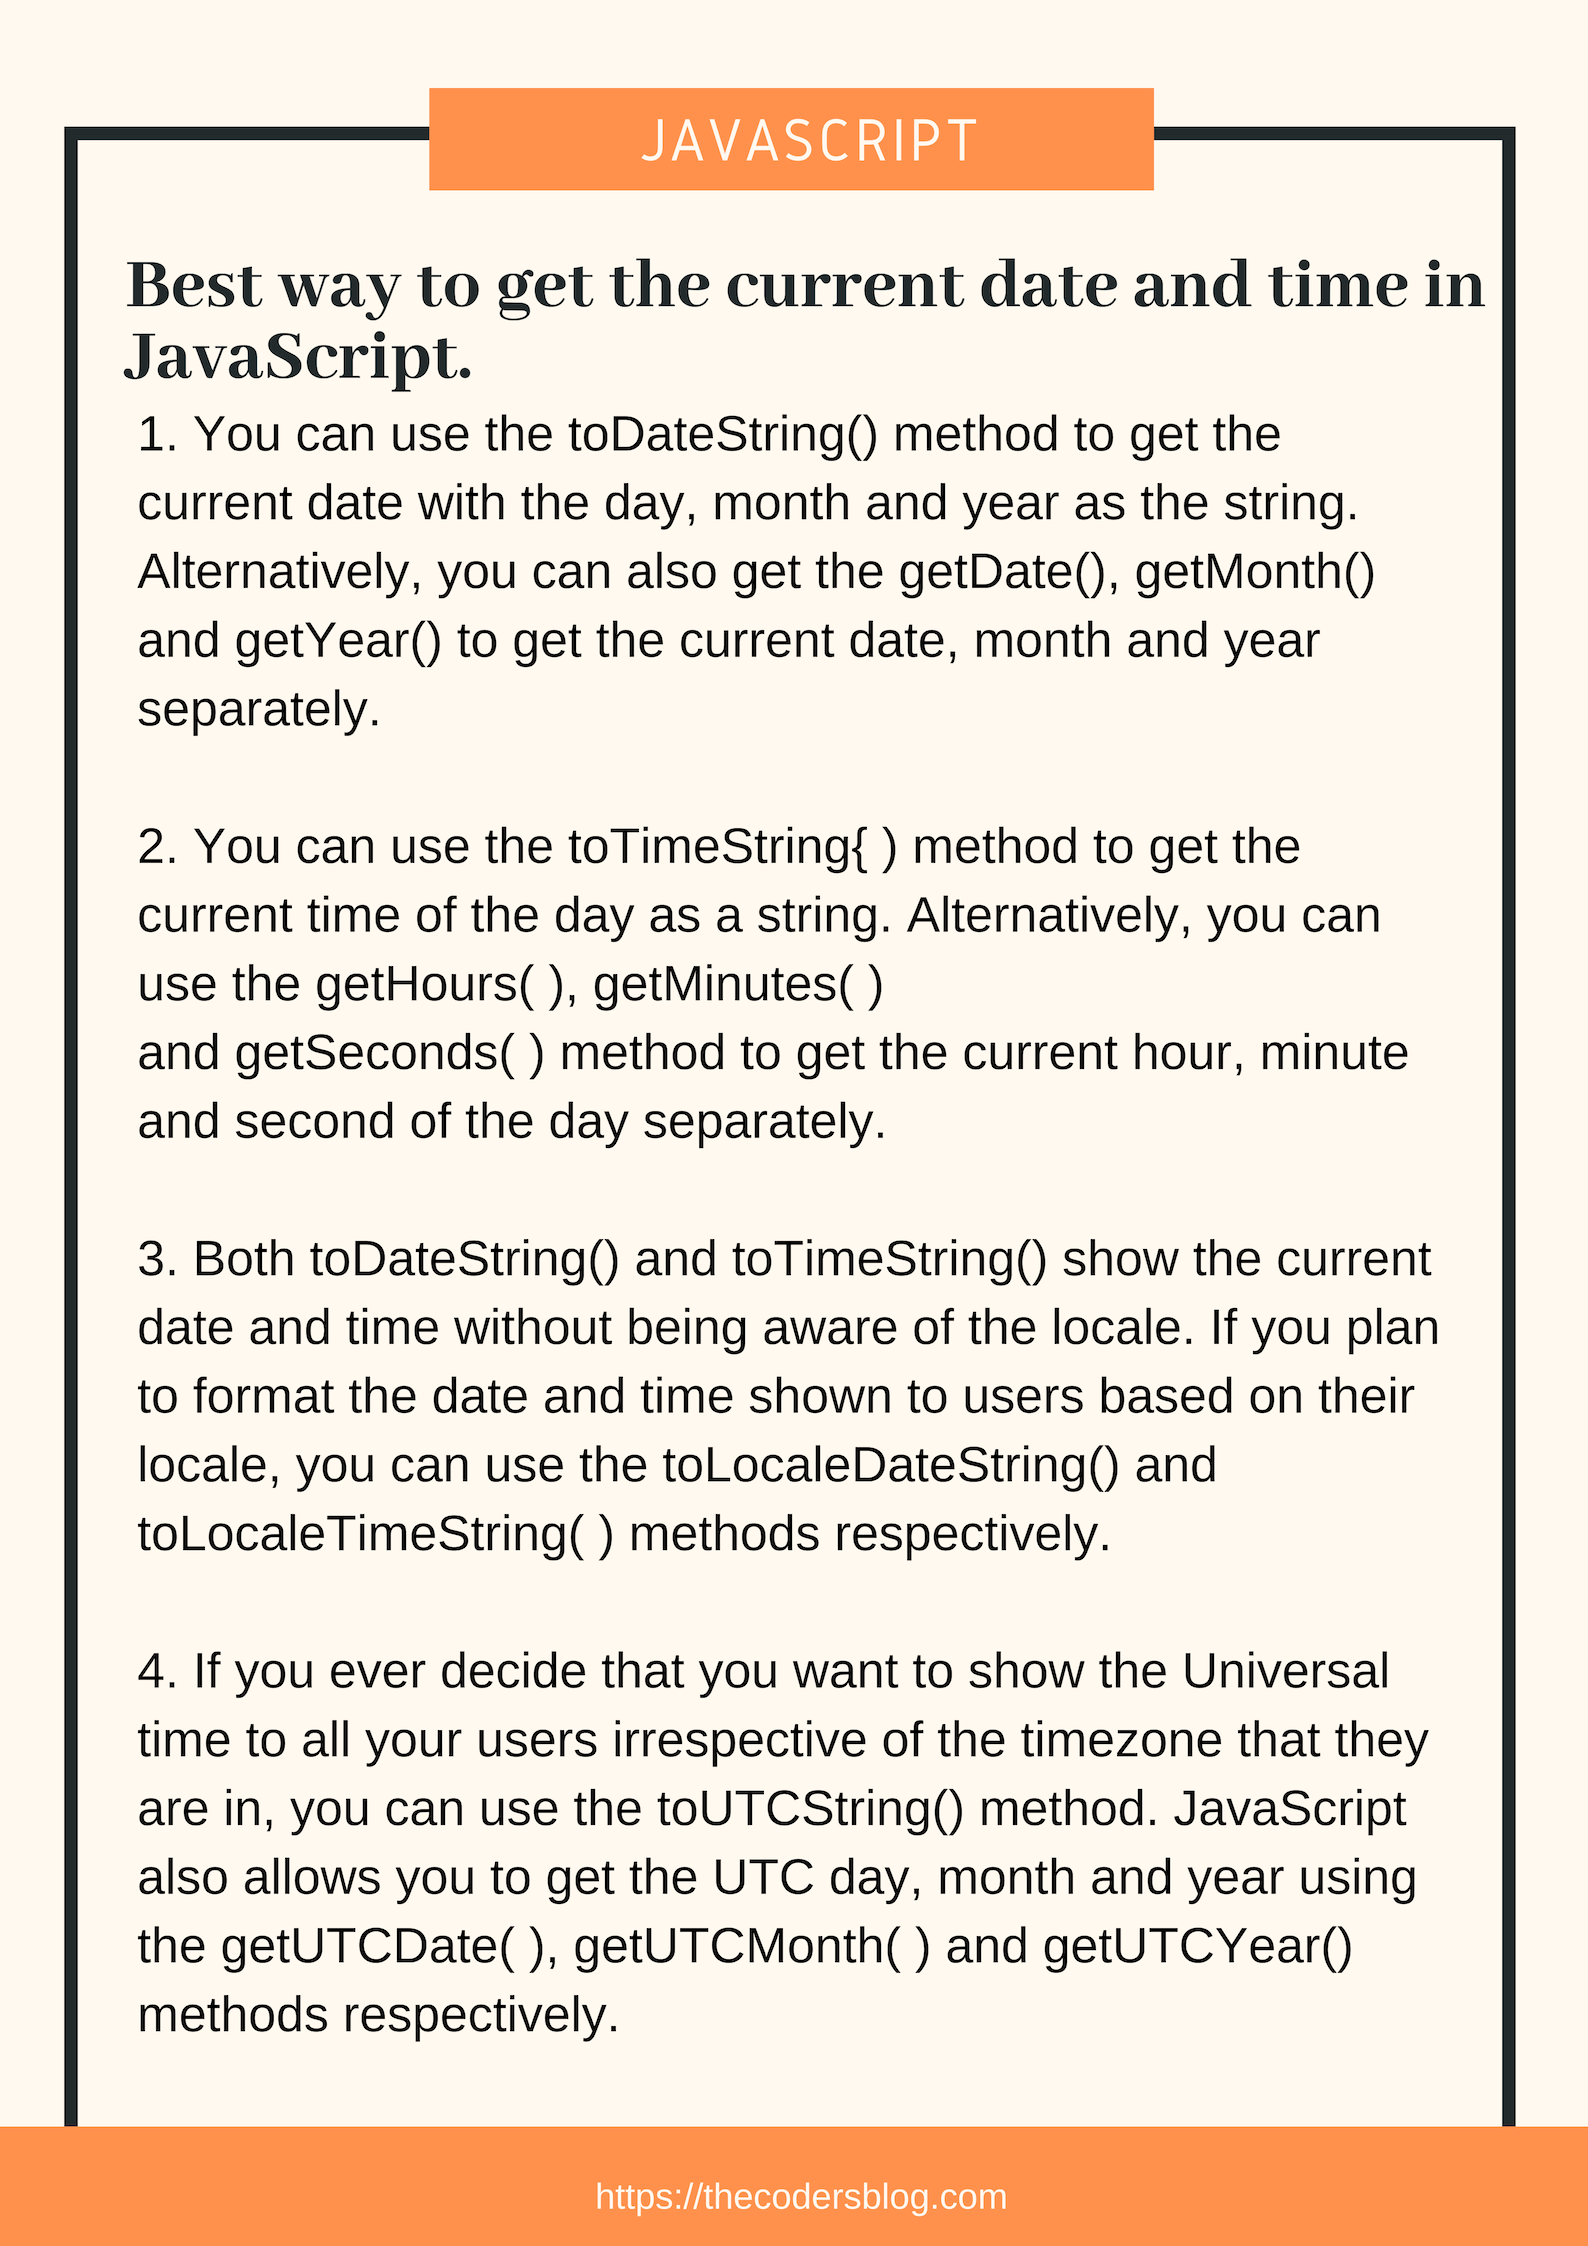 Best way to get the current date and time in JavaScript